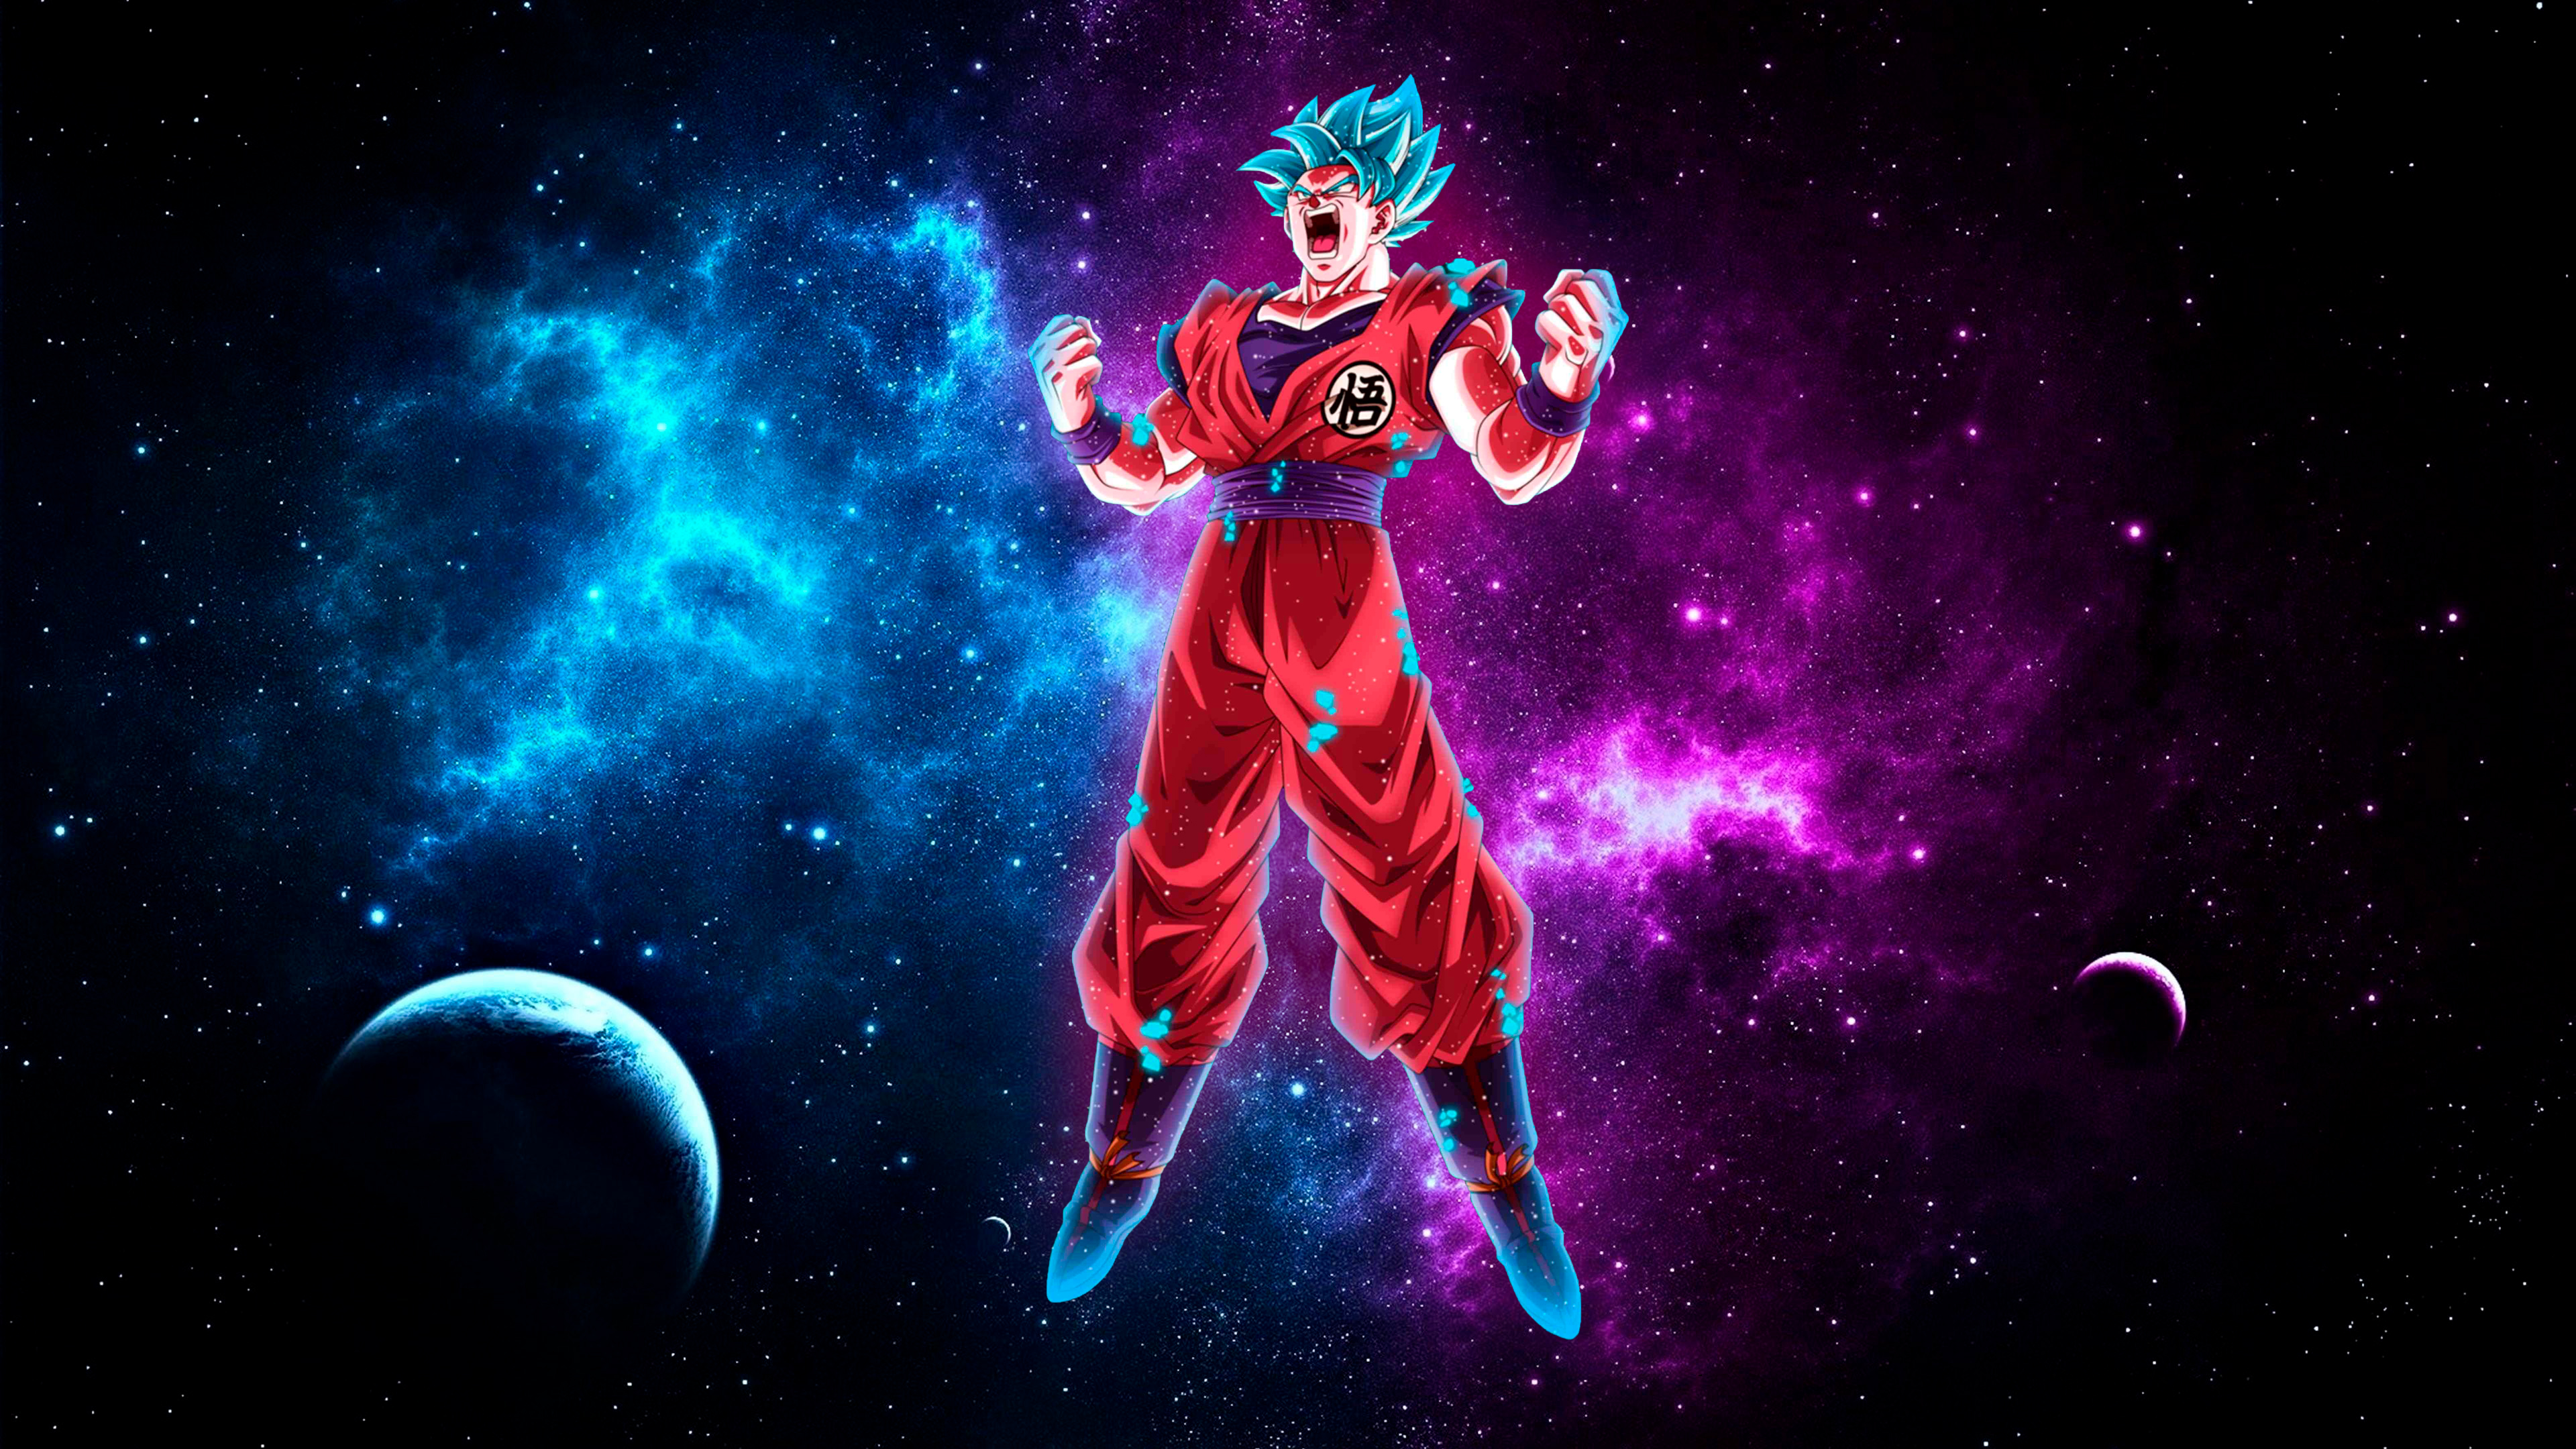 Dragon Ball Super 4K Wallpapers For Pc - Download 3840X2400 Wallpaper